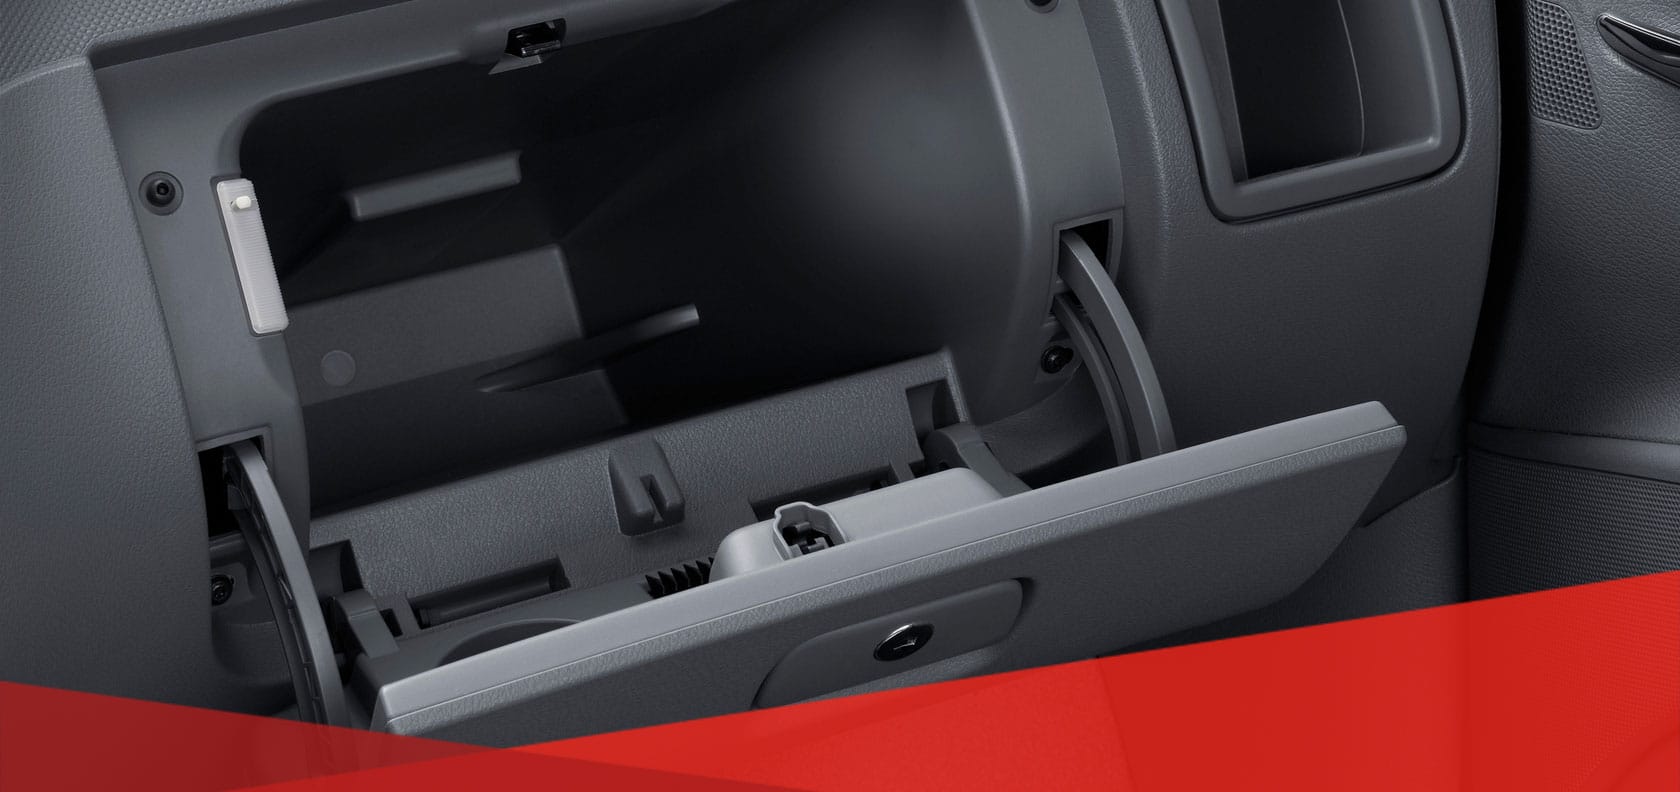 vehicle glovebox or glove compartment